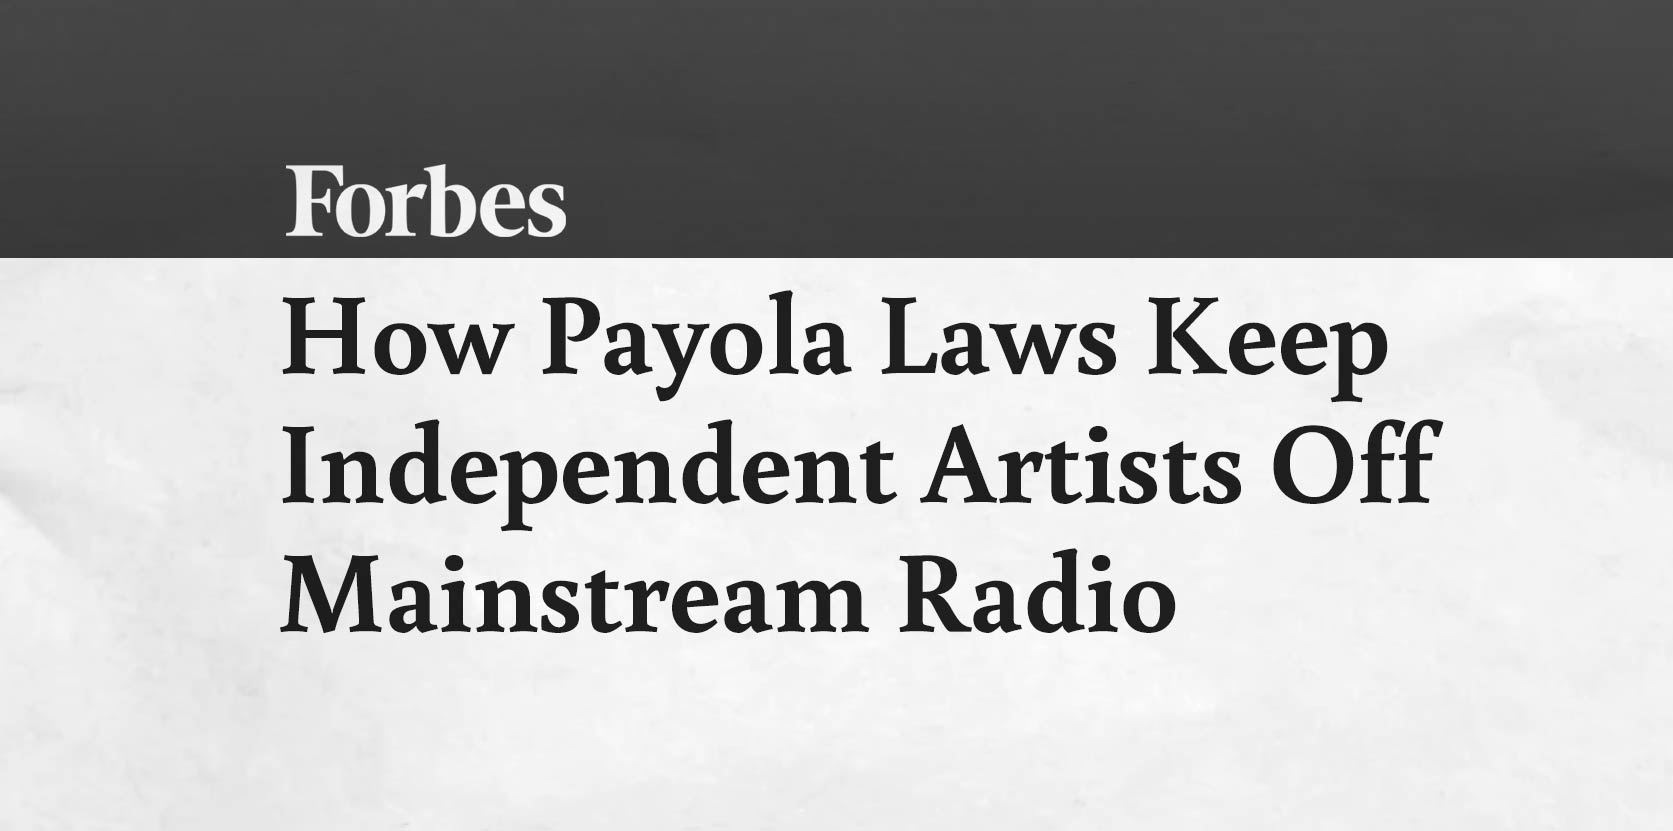 Nick Messitte at Forbes Weighs In On Payola Laws